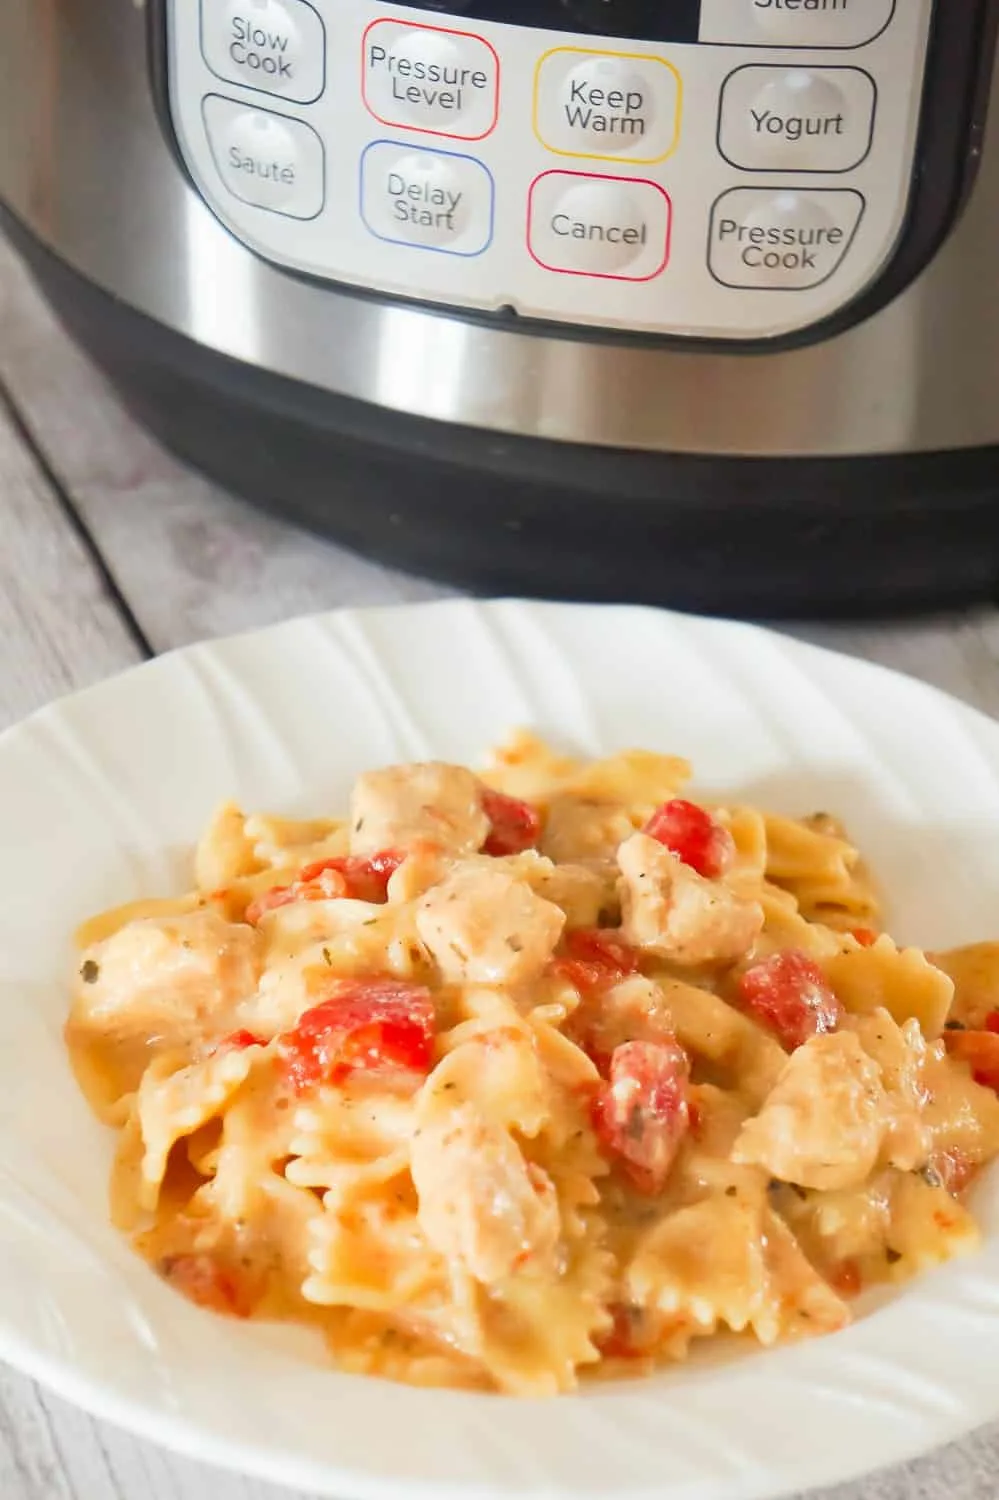 Instant Pot Bruschetta Chicken Pasta is an easy dinner recipe packed with flavour.This easy bow tie pasta recipe is loaded with chicken breast, diced tomatoes, basil pesto and Parmesan cheese.